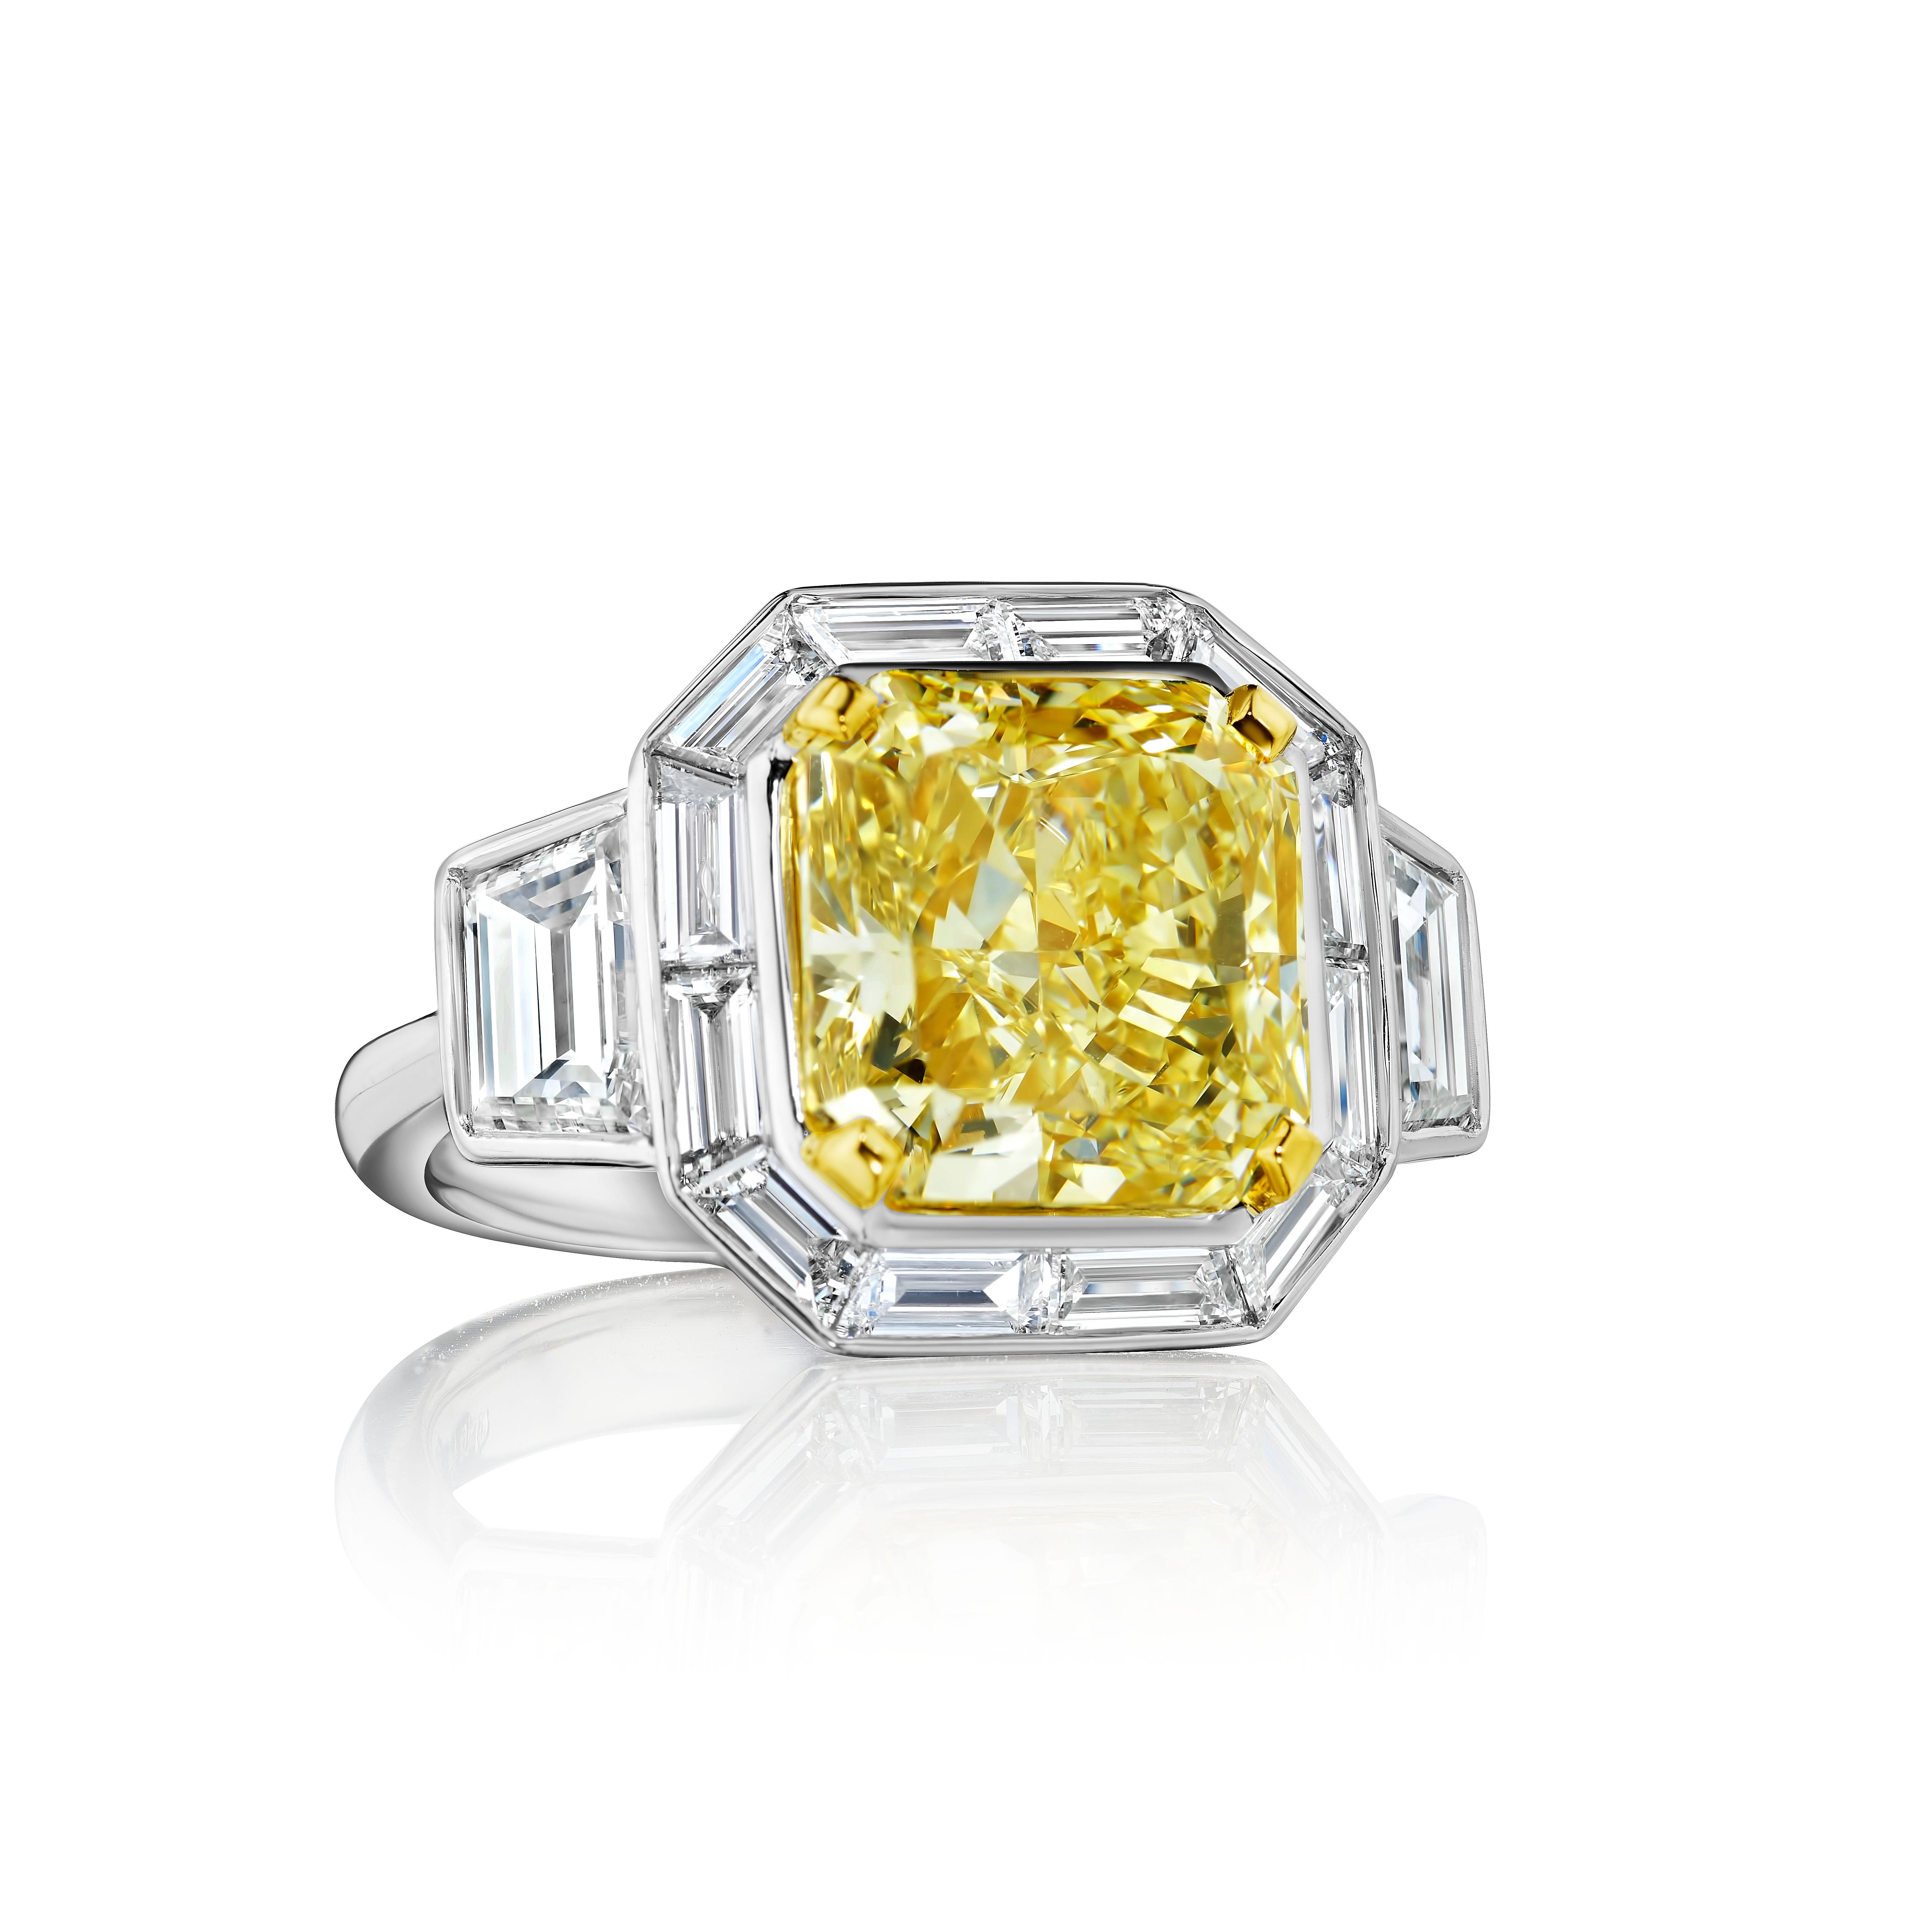 A very unique ring of the highest craftsmanship. Ultimate Sophistication and Class. 
Radiant Cut Diamond weighing 7.43 Carats, certified as Fancy Light Yellow, VS1 clarity. 
Trapezoid sides weighing 1.53 carats. 
Baguette and Trapezoid diamonds